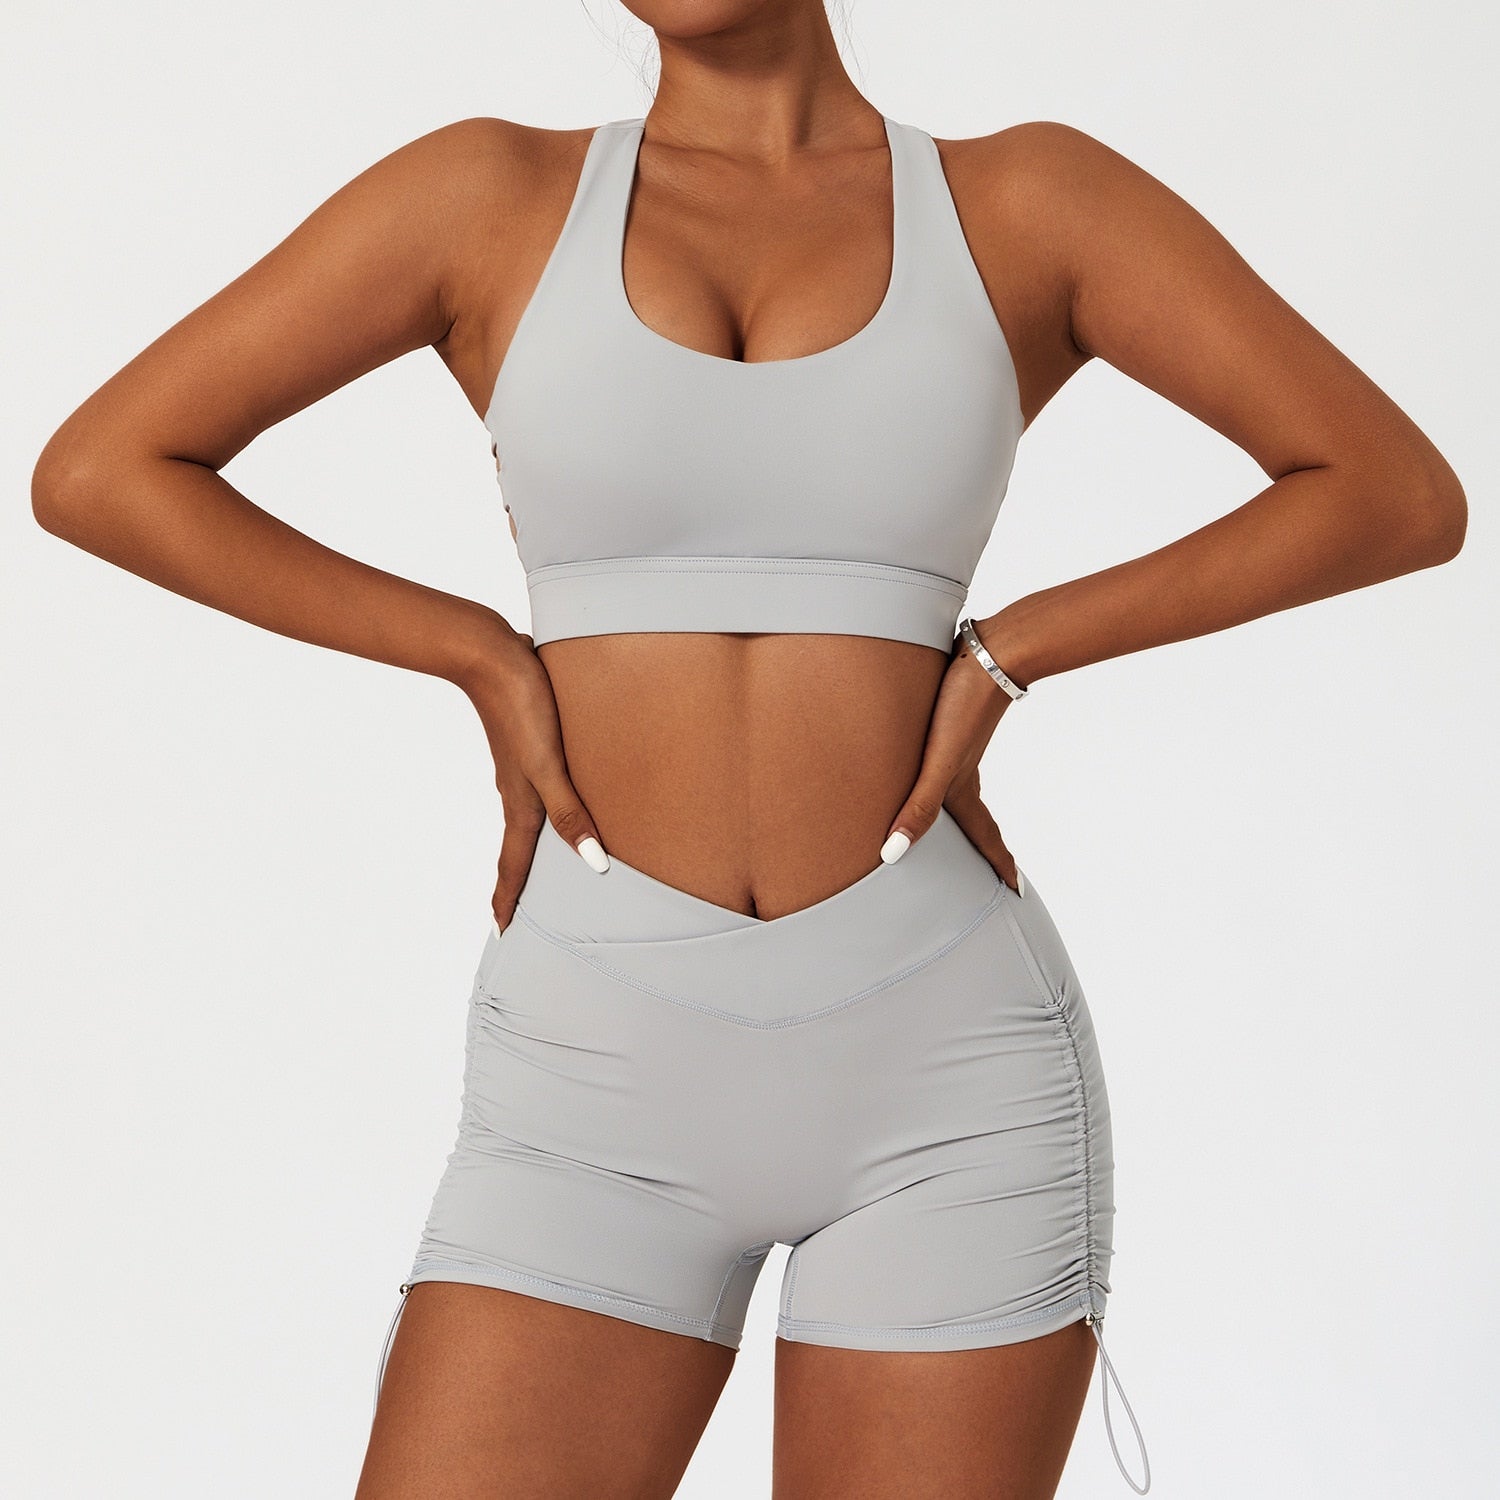 2 Piece Women's Yoga Set Workout Shirts Sport Pants Bra Gym Suits Fitness Shorts Crop Top High Waist Running Leggings Sports Sets The Clothing Company Sydney